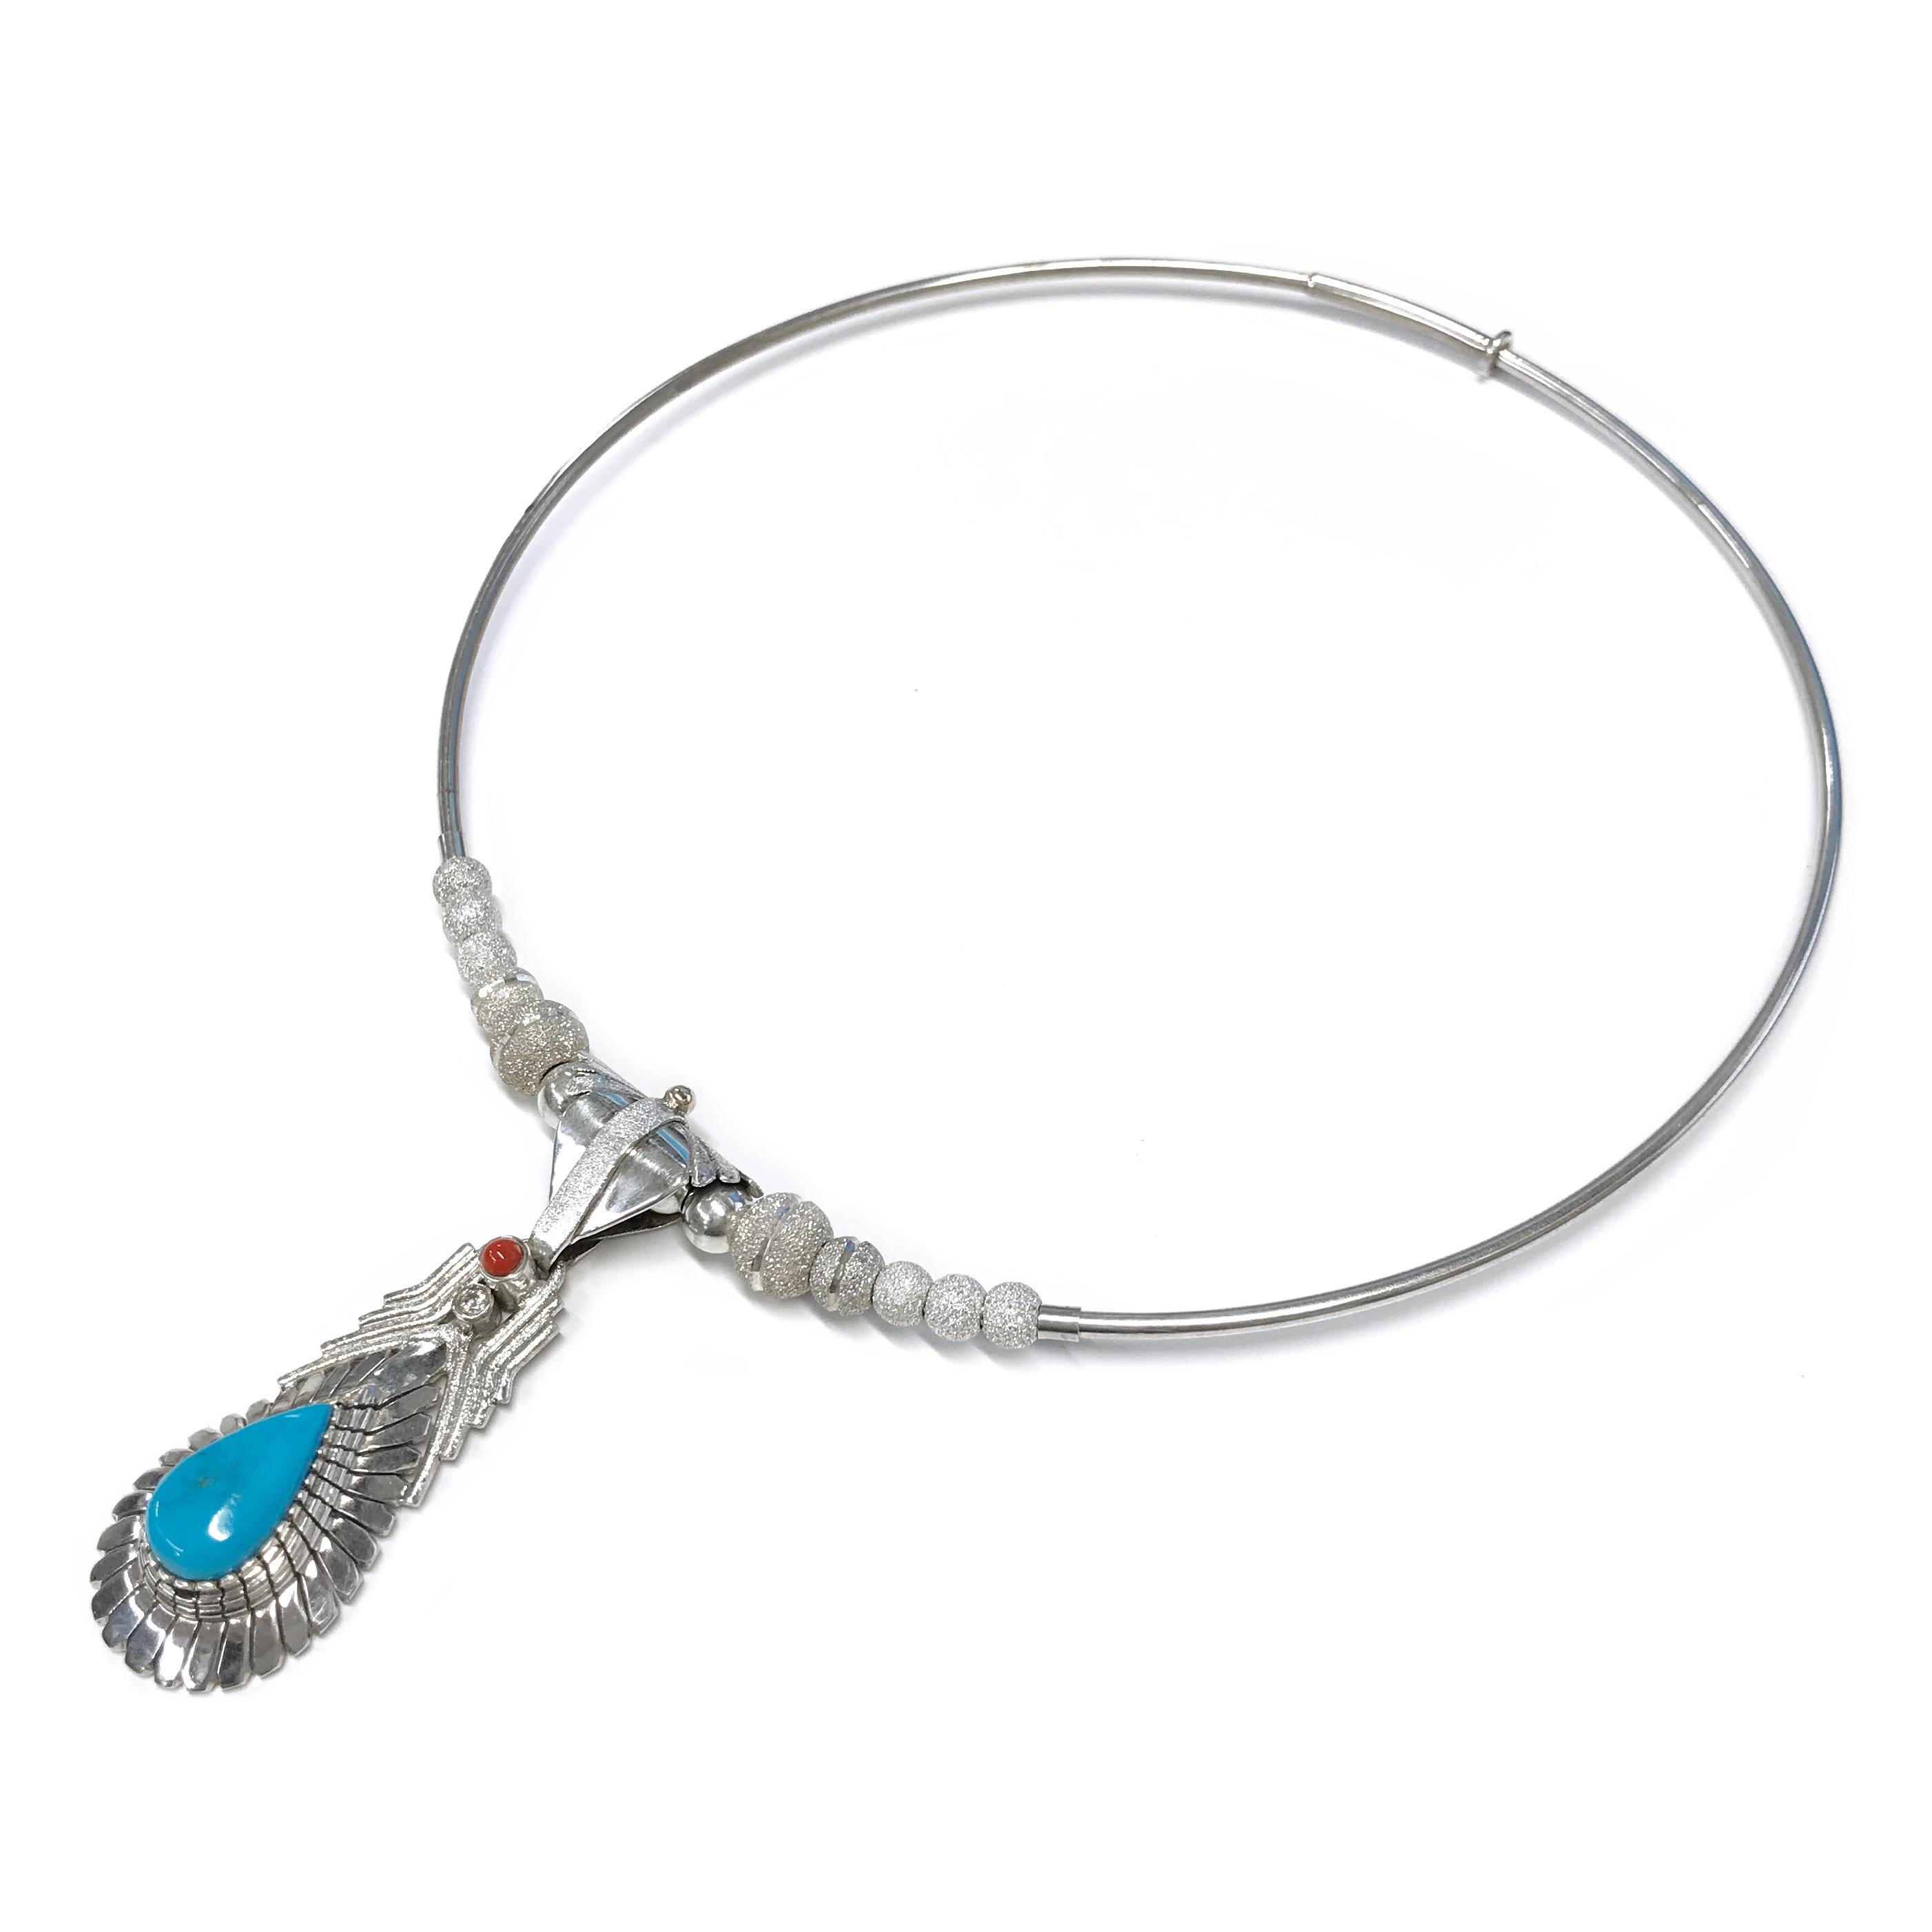 Handcrafted from a sterling silver sheet by jewelry maker, Ray Winner. The choker necklace consists of four smaller silver beads with ten graduate stone finish silver beads on silver wire with plunger closure. The pendant features a pearl-shaped